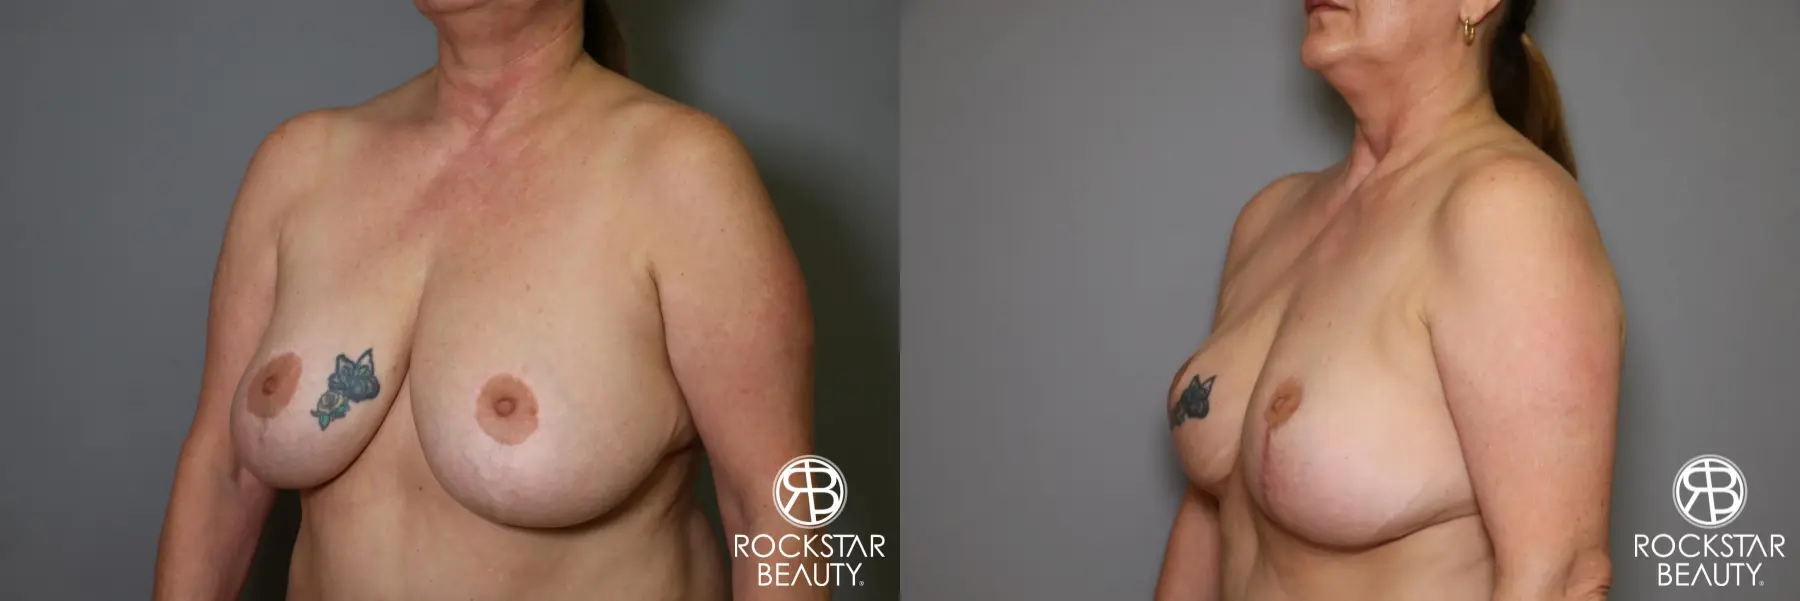 Mastopexy: Patient 2 - Before and After 3